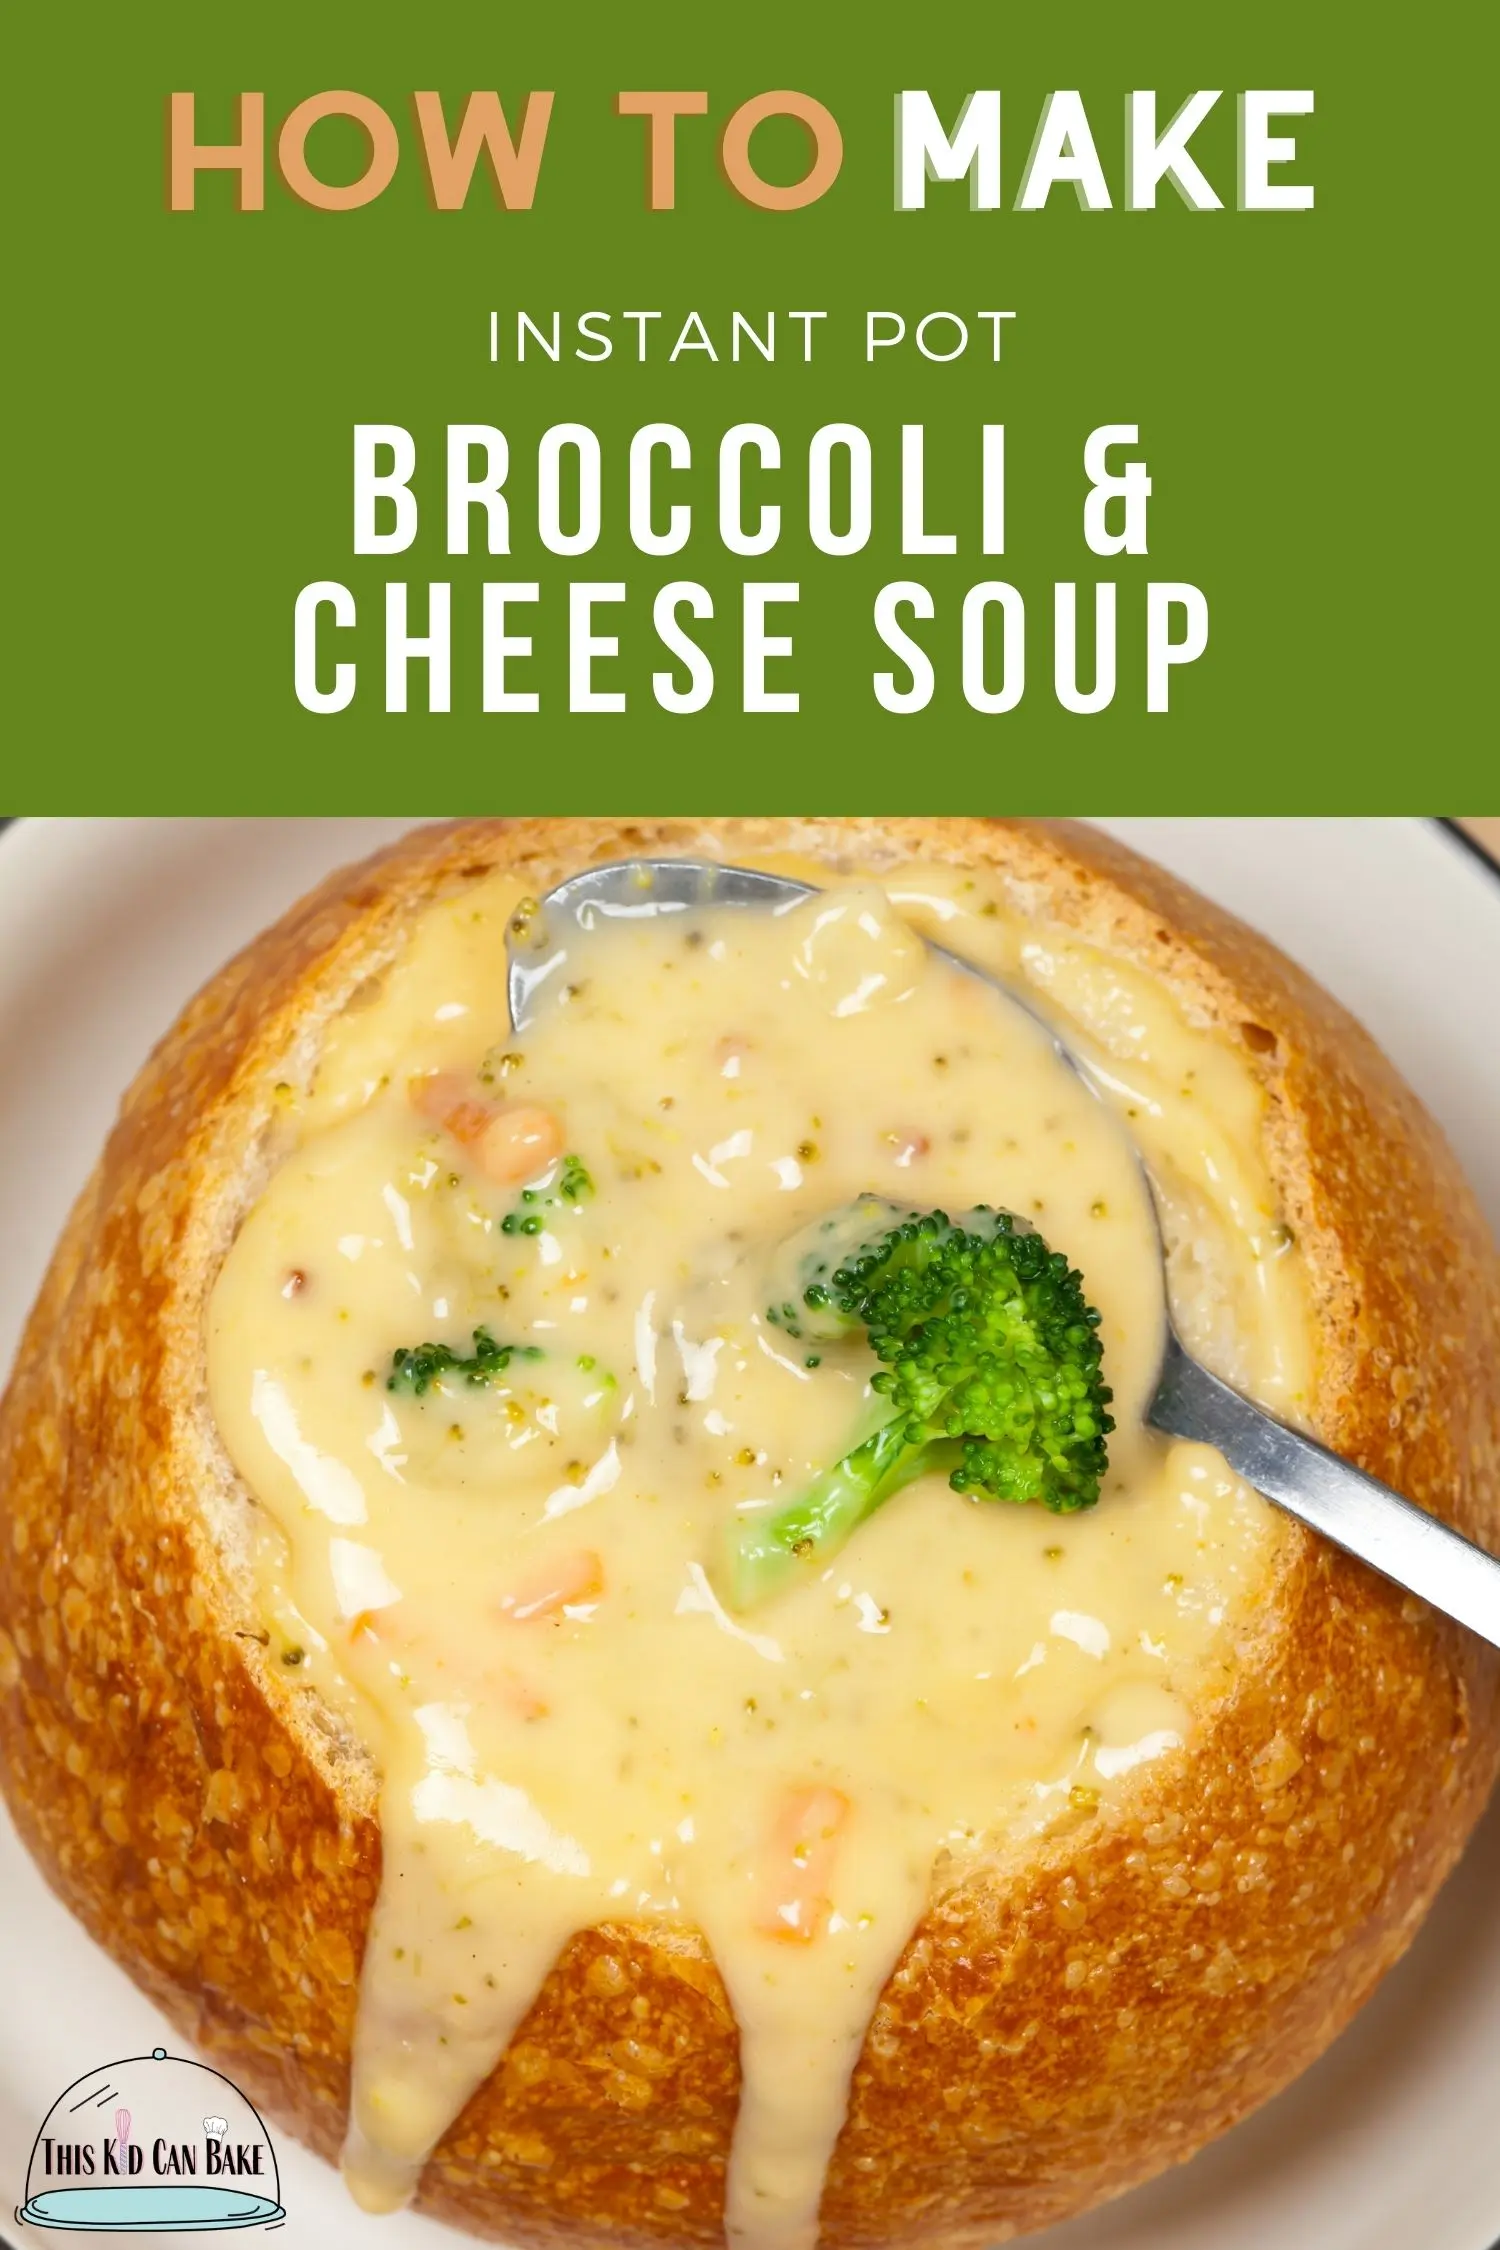 Make Broccoli and Cheese Soup in an Instant Pot